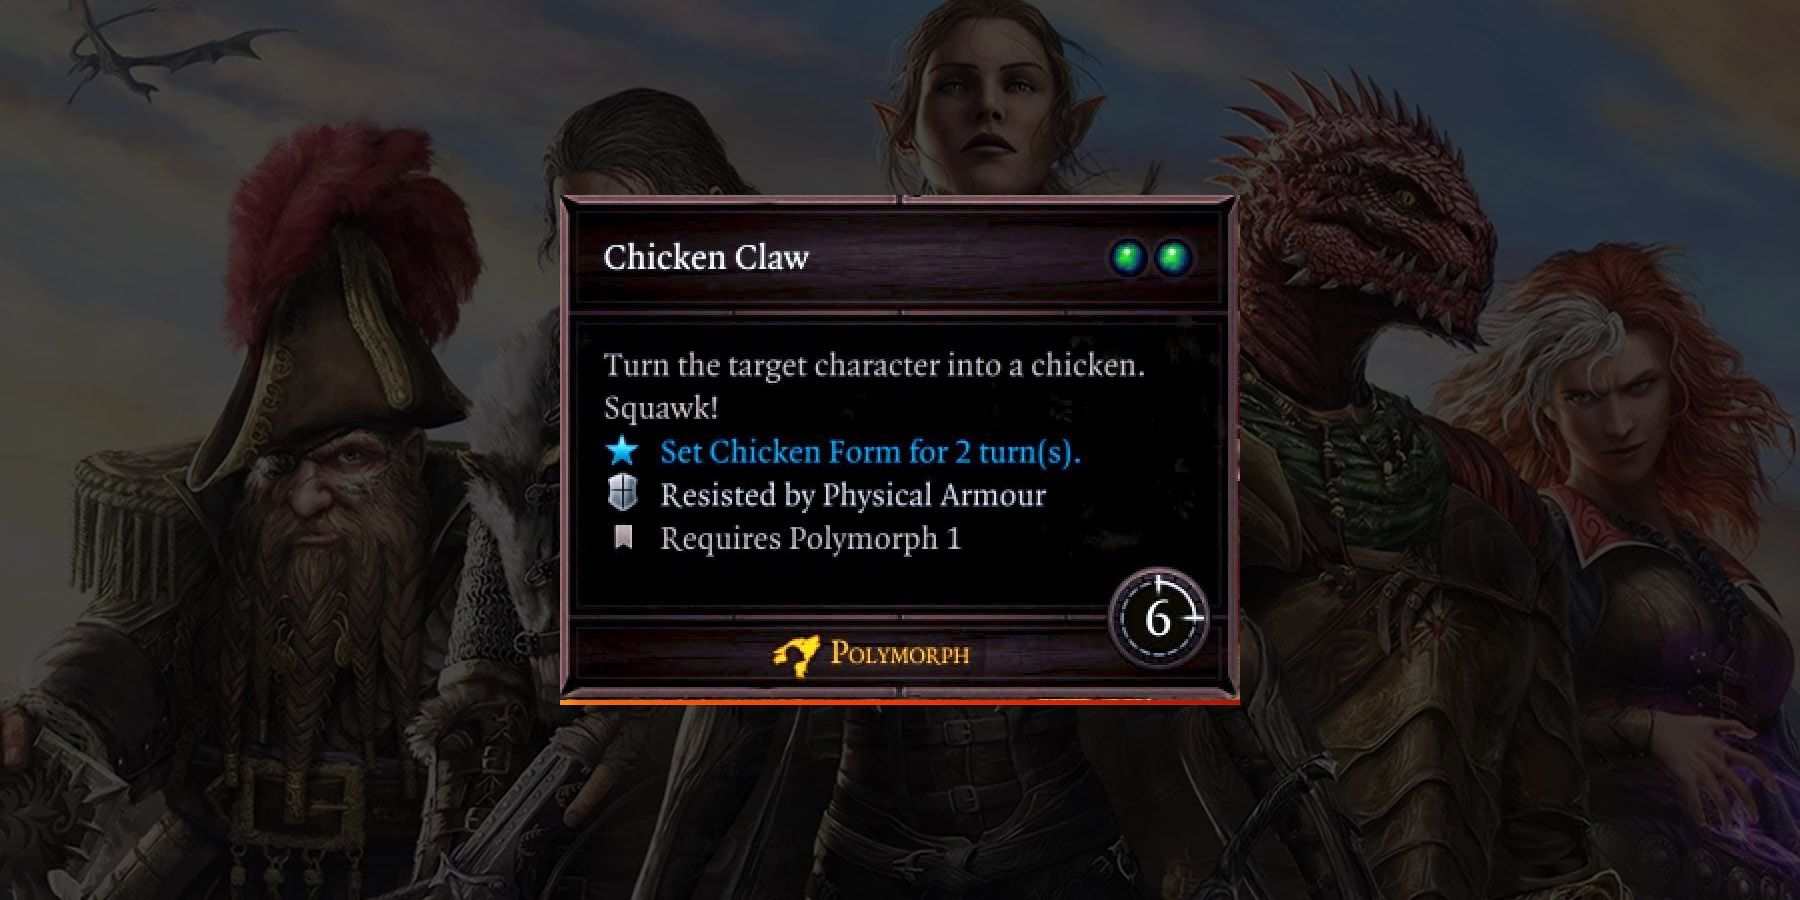 The Chicken Claw Skill